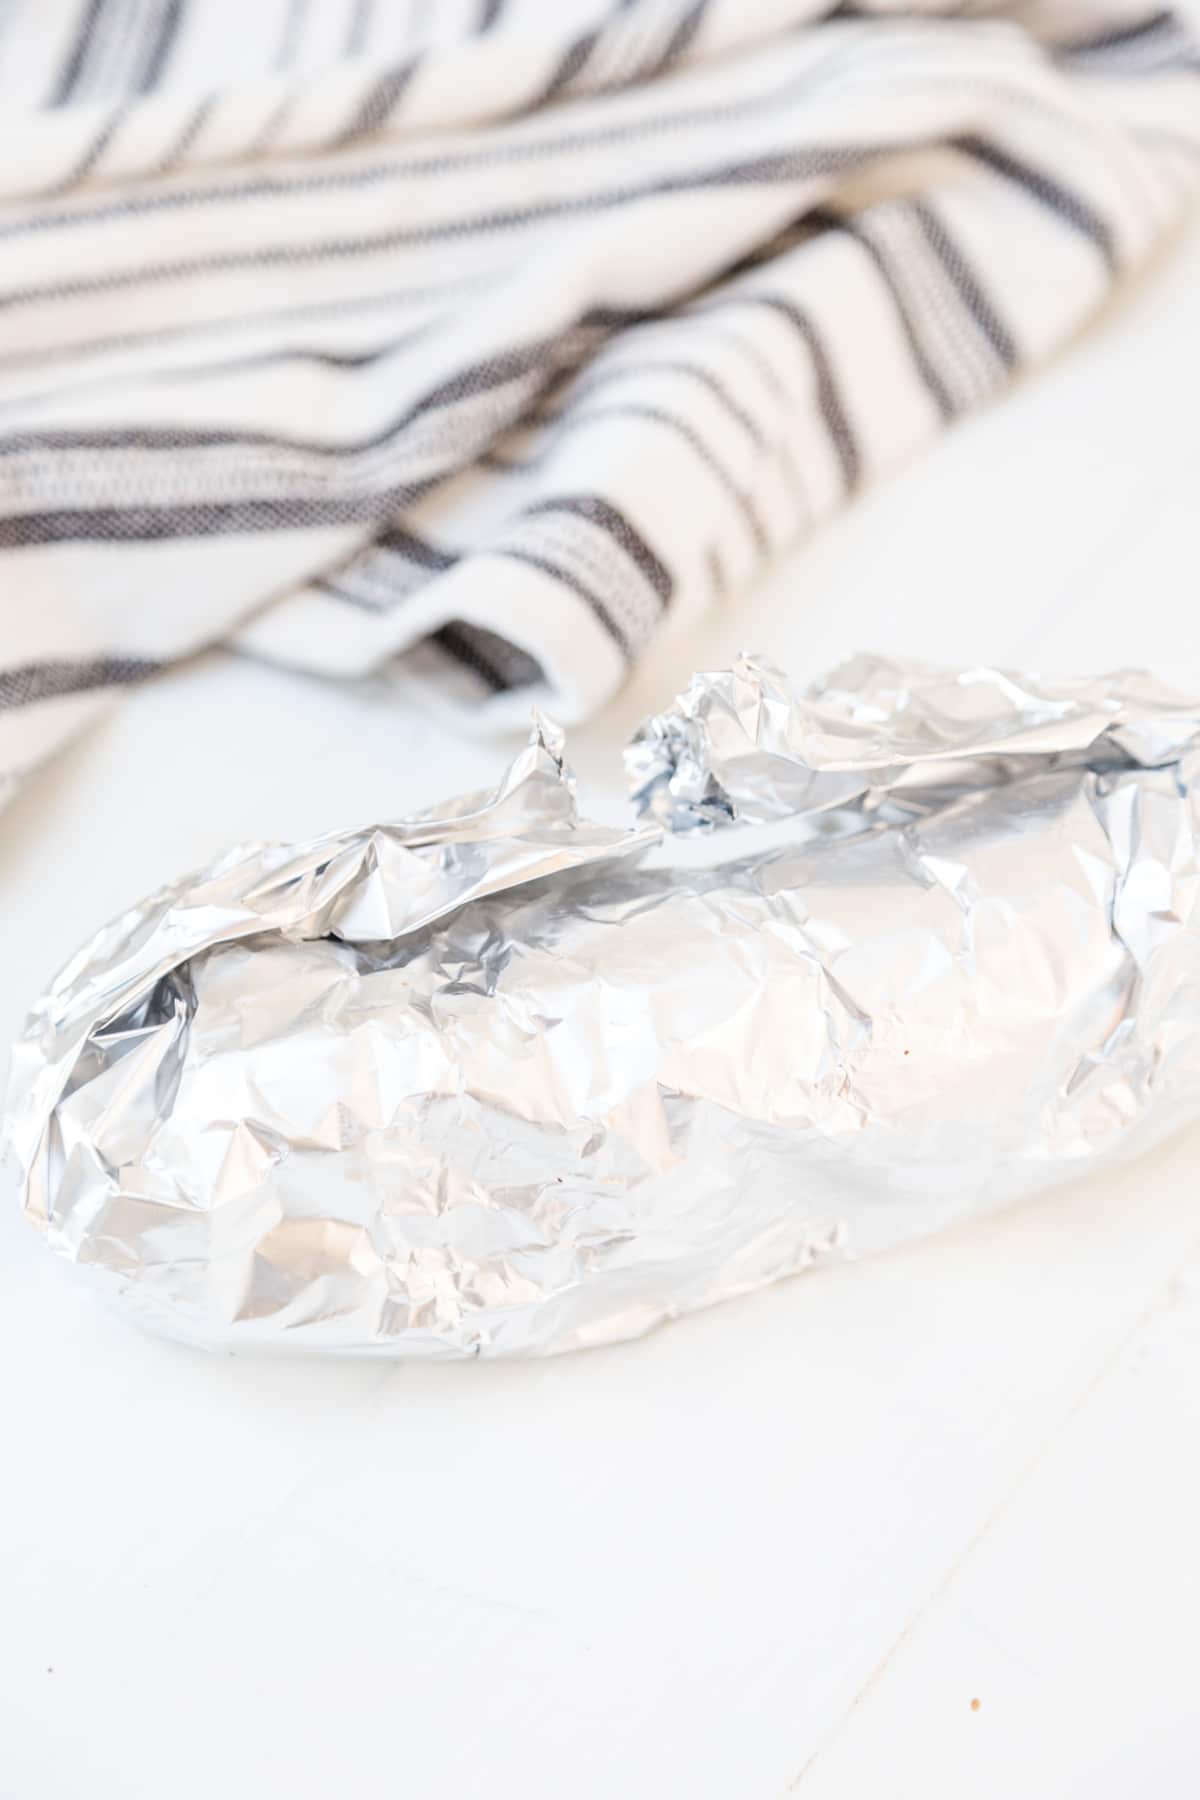 Aluminum foil wrapped around a log of dough with a black and white striped towel next to it.